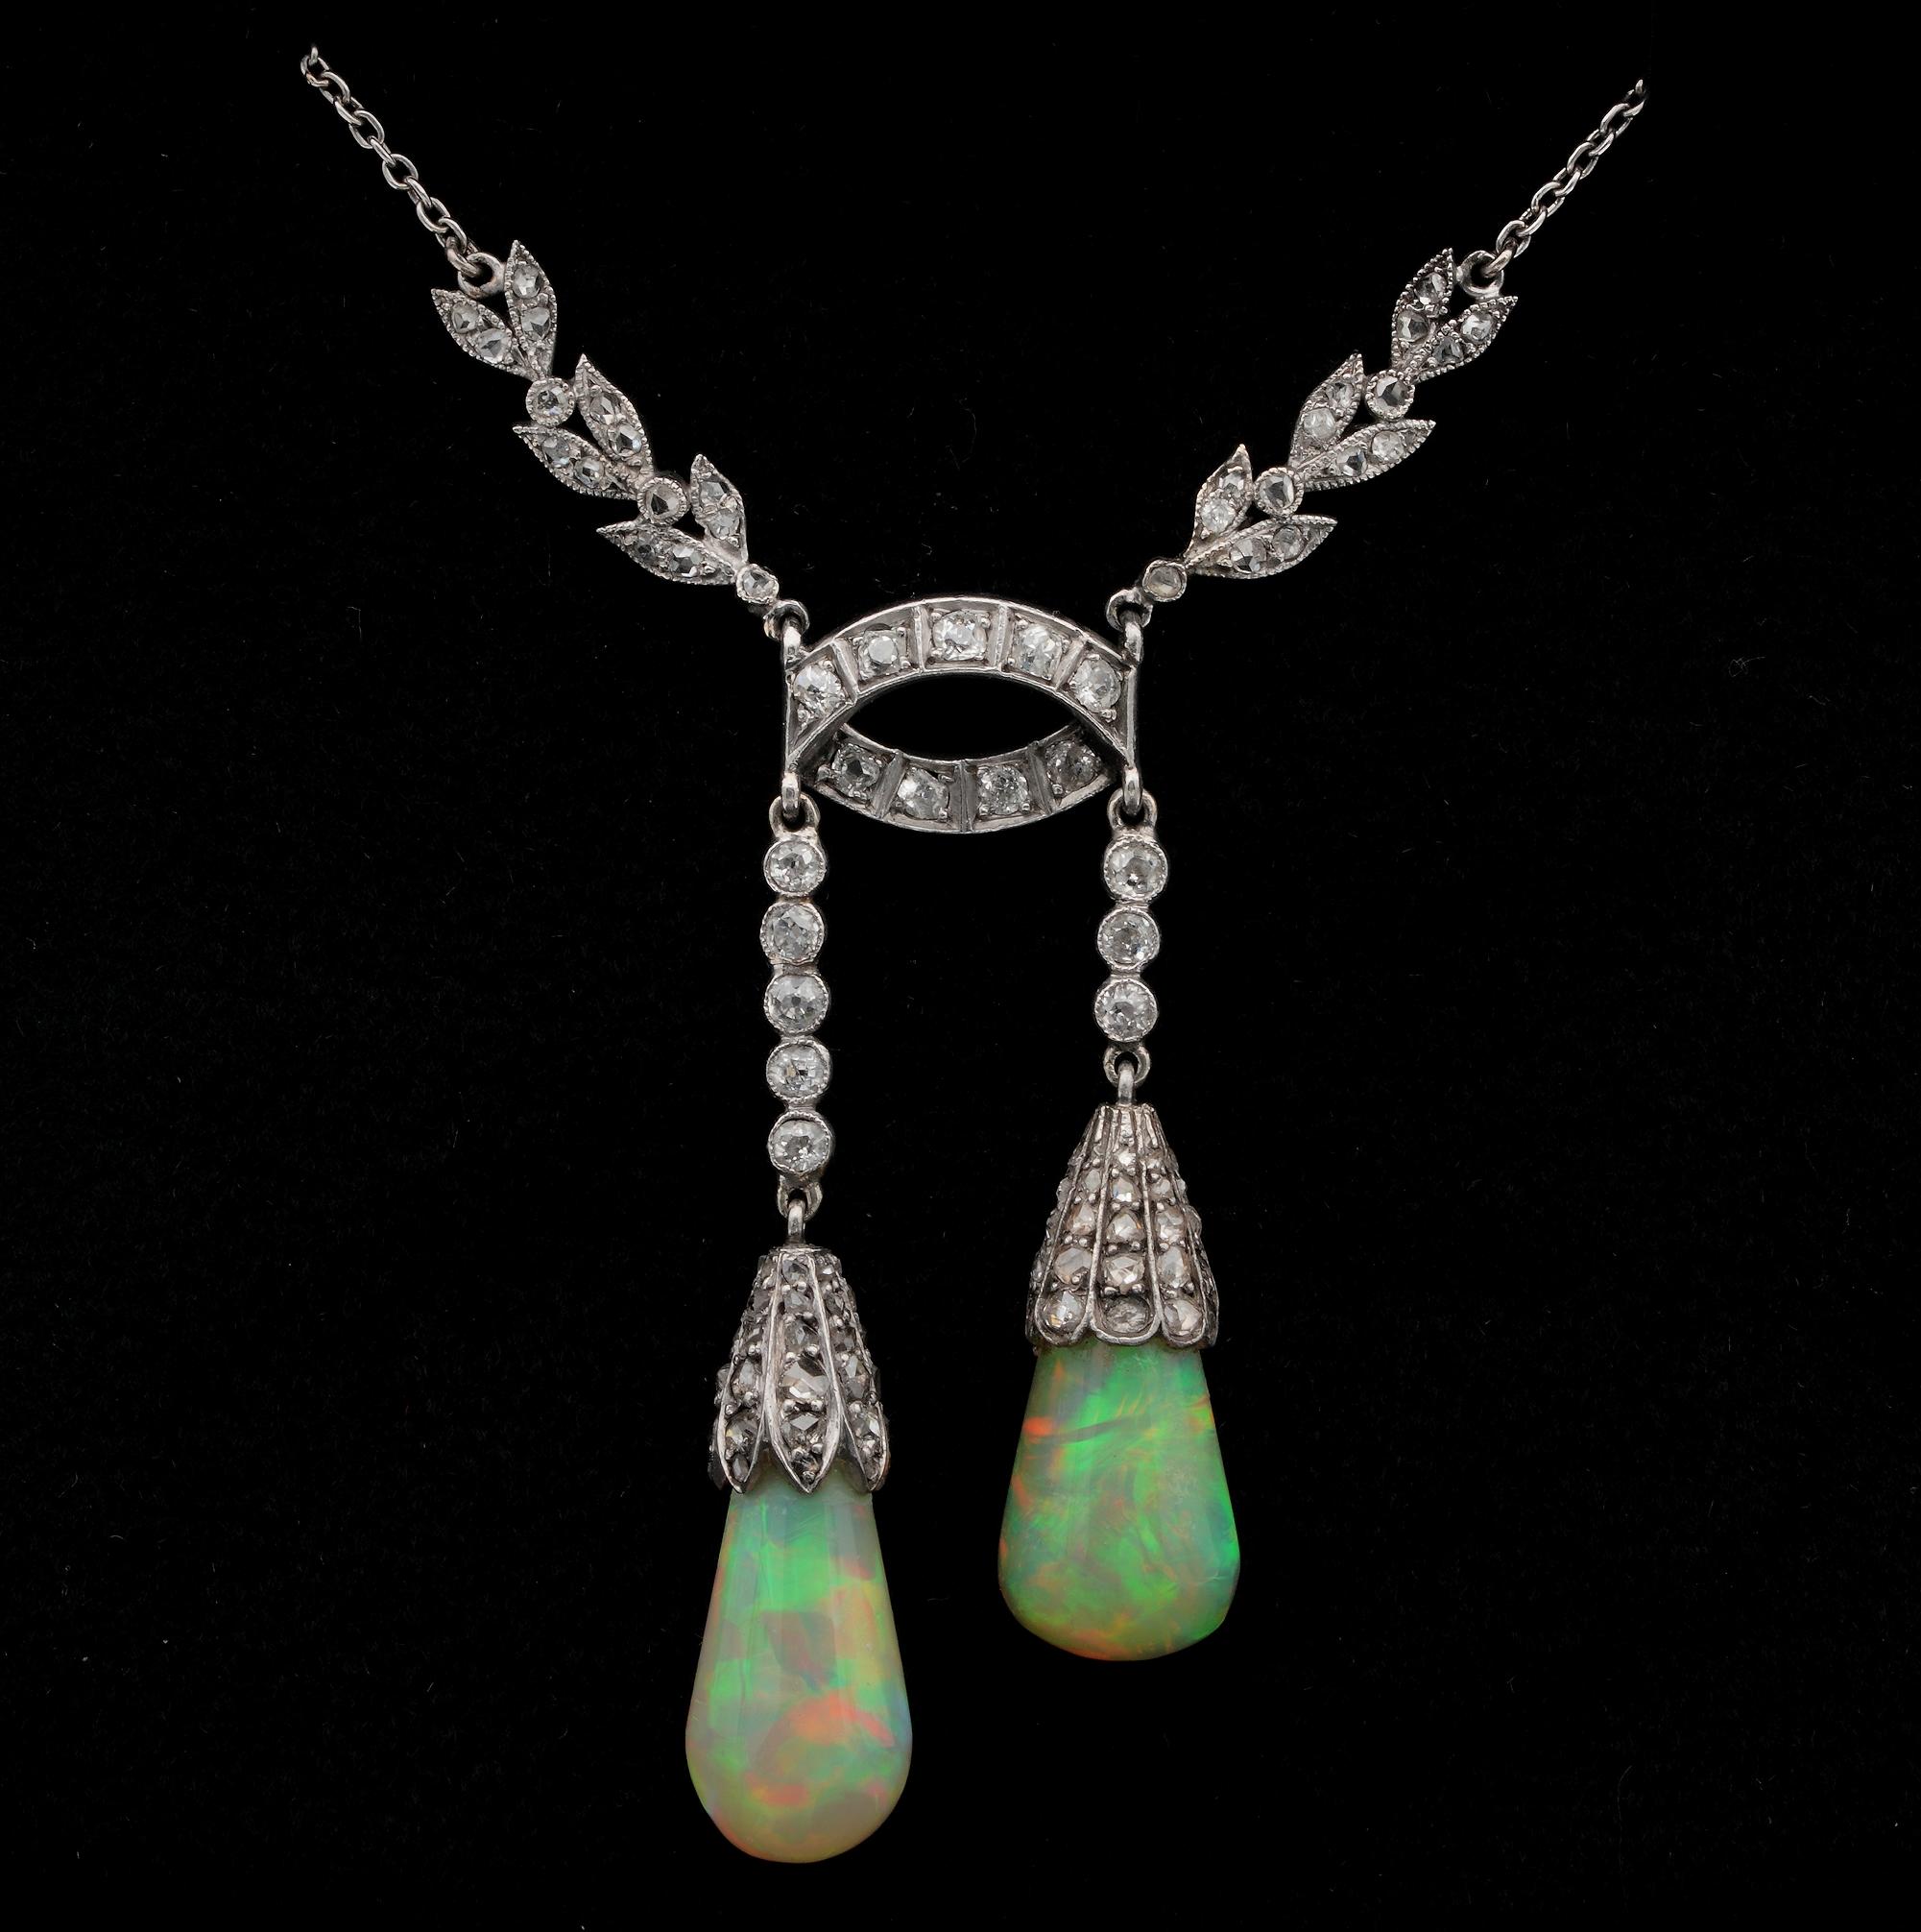 The Era of Refinement
A sublime 1905 ca Edwardian era negligee necklace, rarest in beauty, holding the finest large, natural Australian Opals as rarely seen
A special find for the Opals lover and the antique jewellery
A négligée is a necklace of